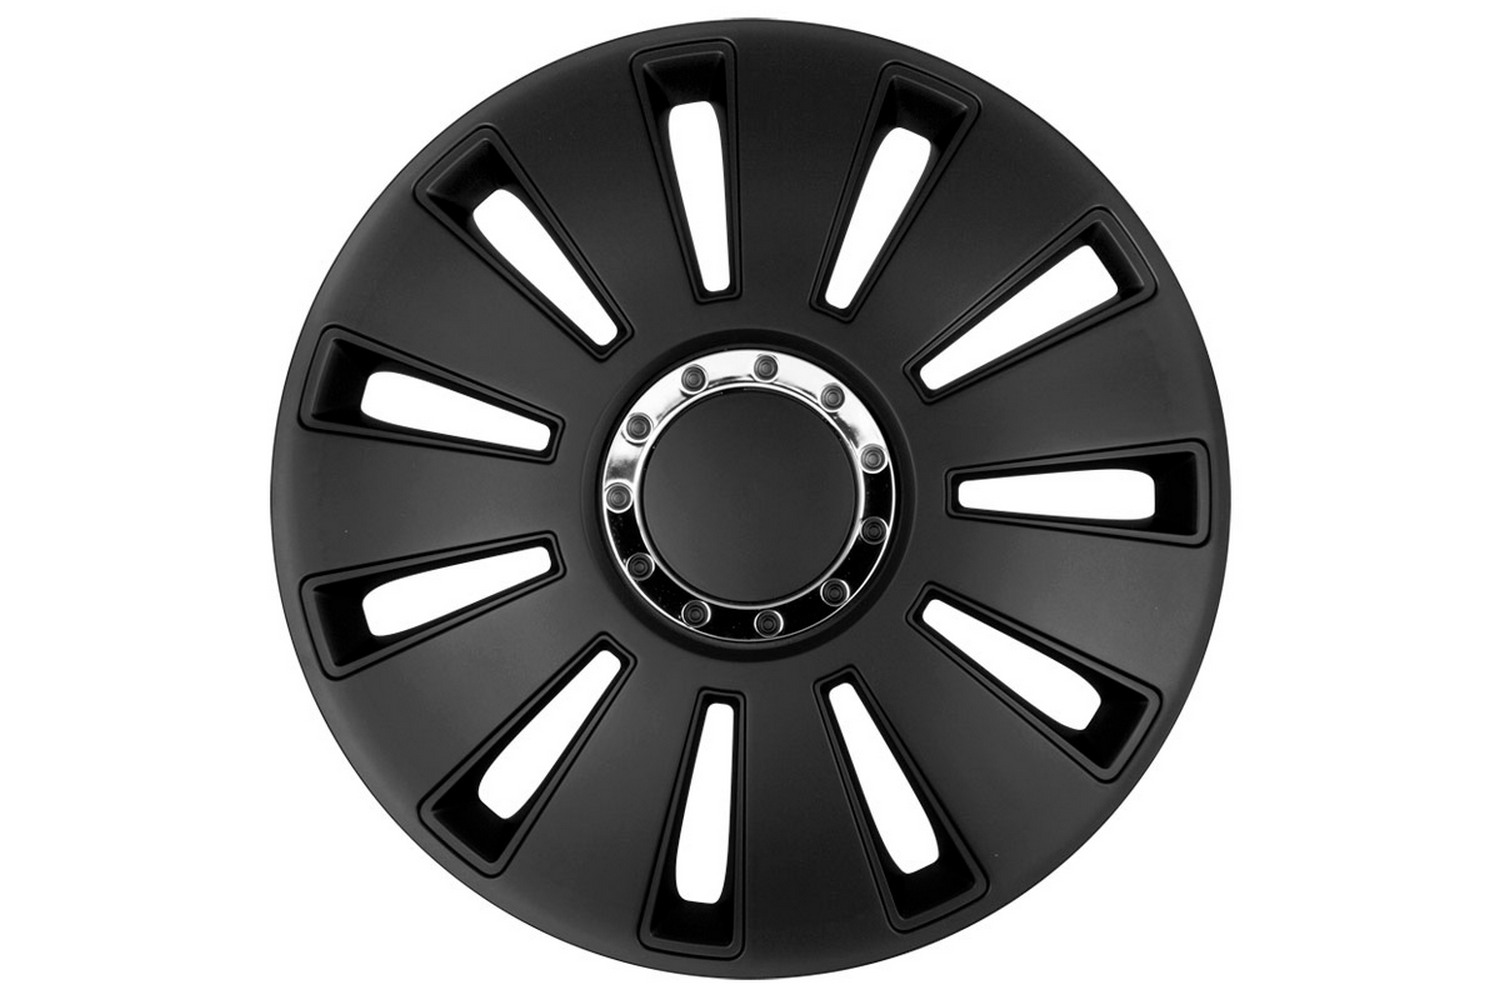 Wheel covers Silverstone Pro 17 inch set 4 pieces